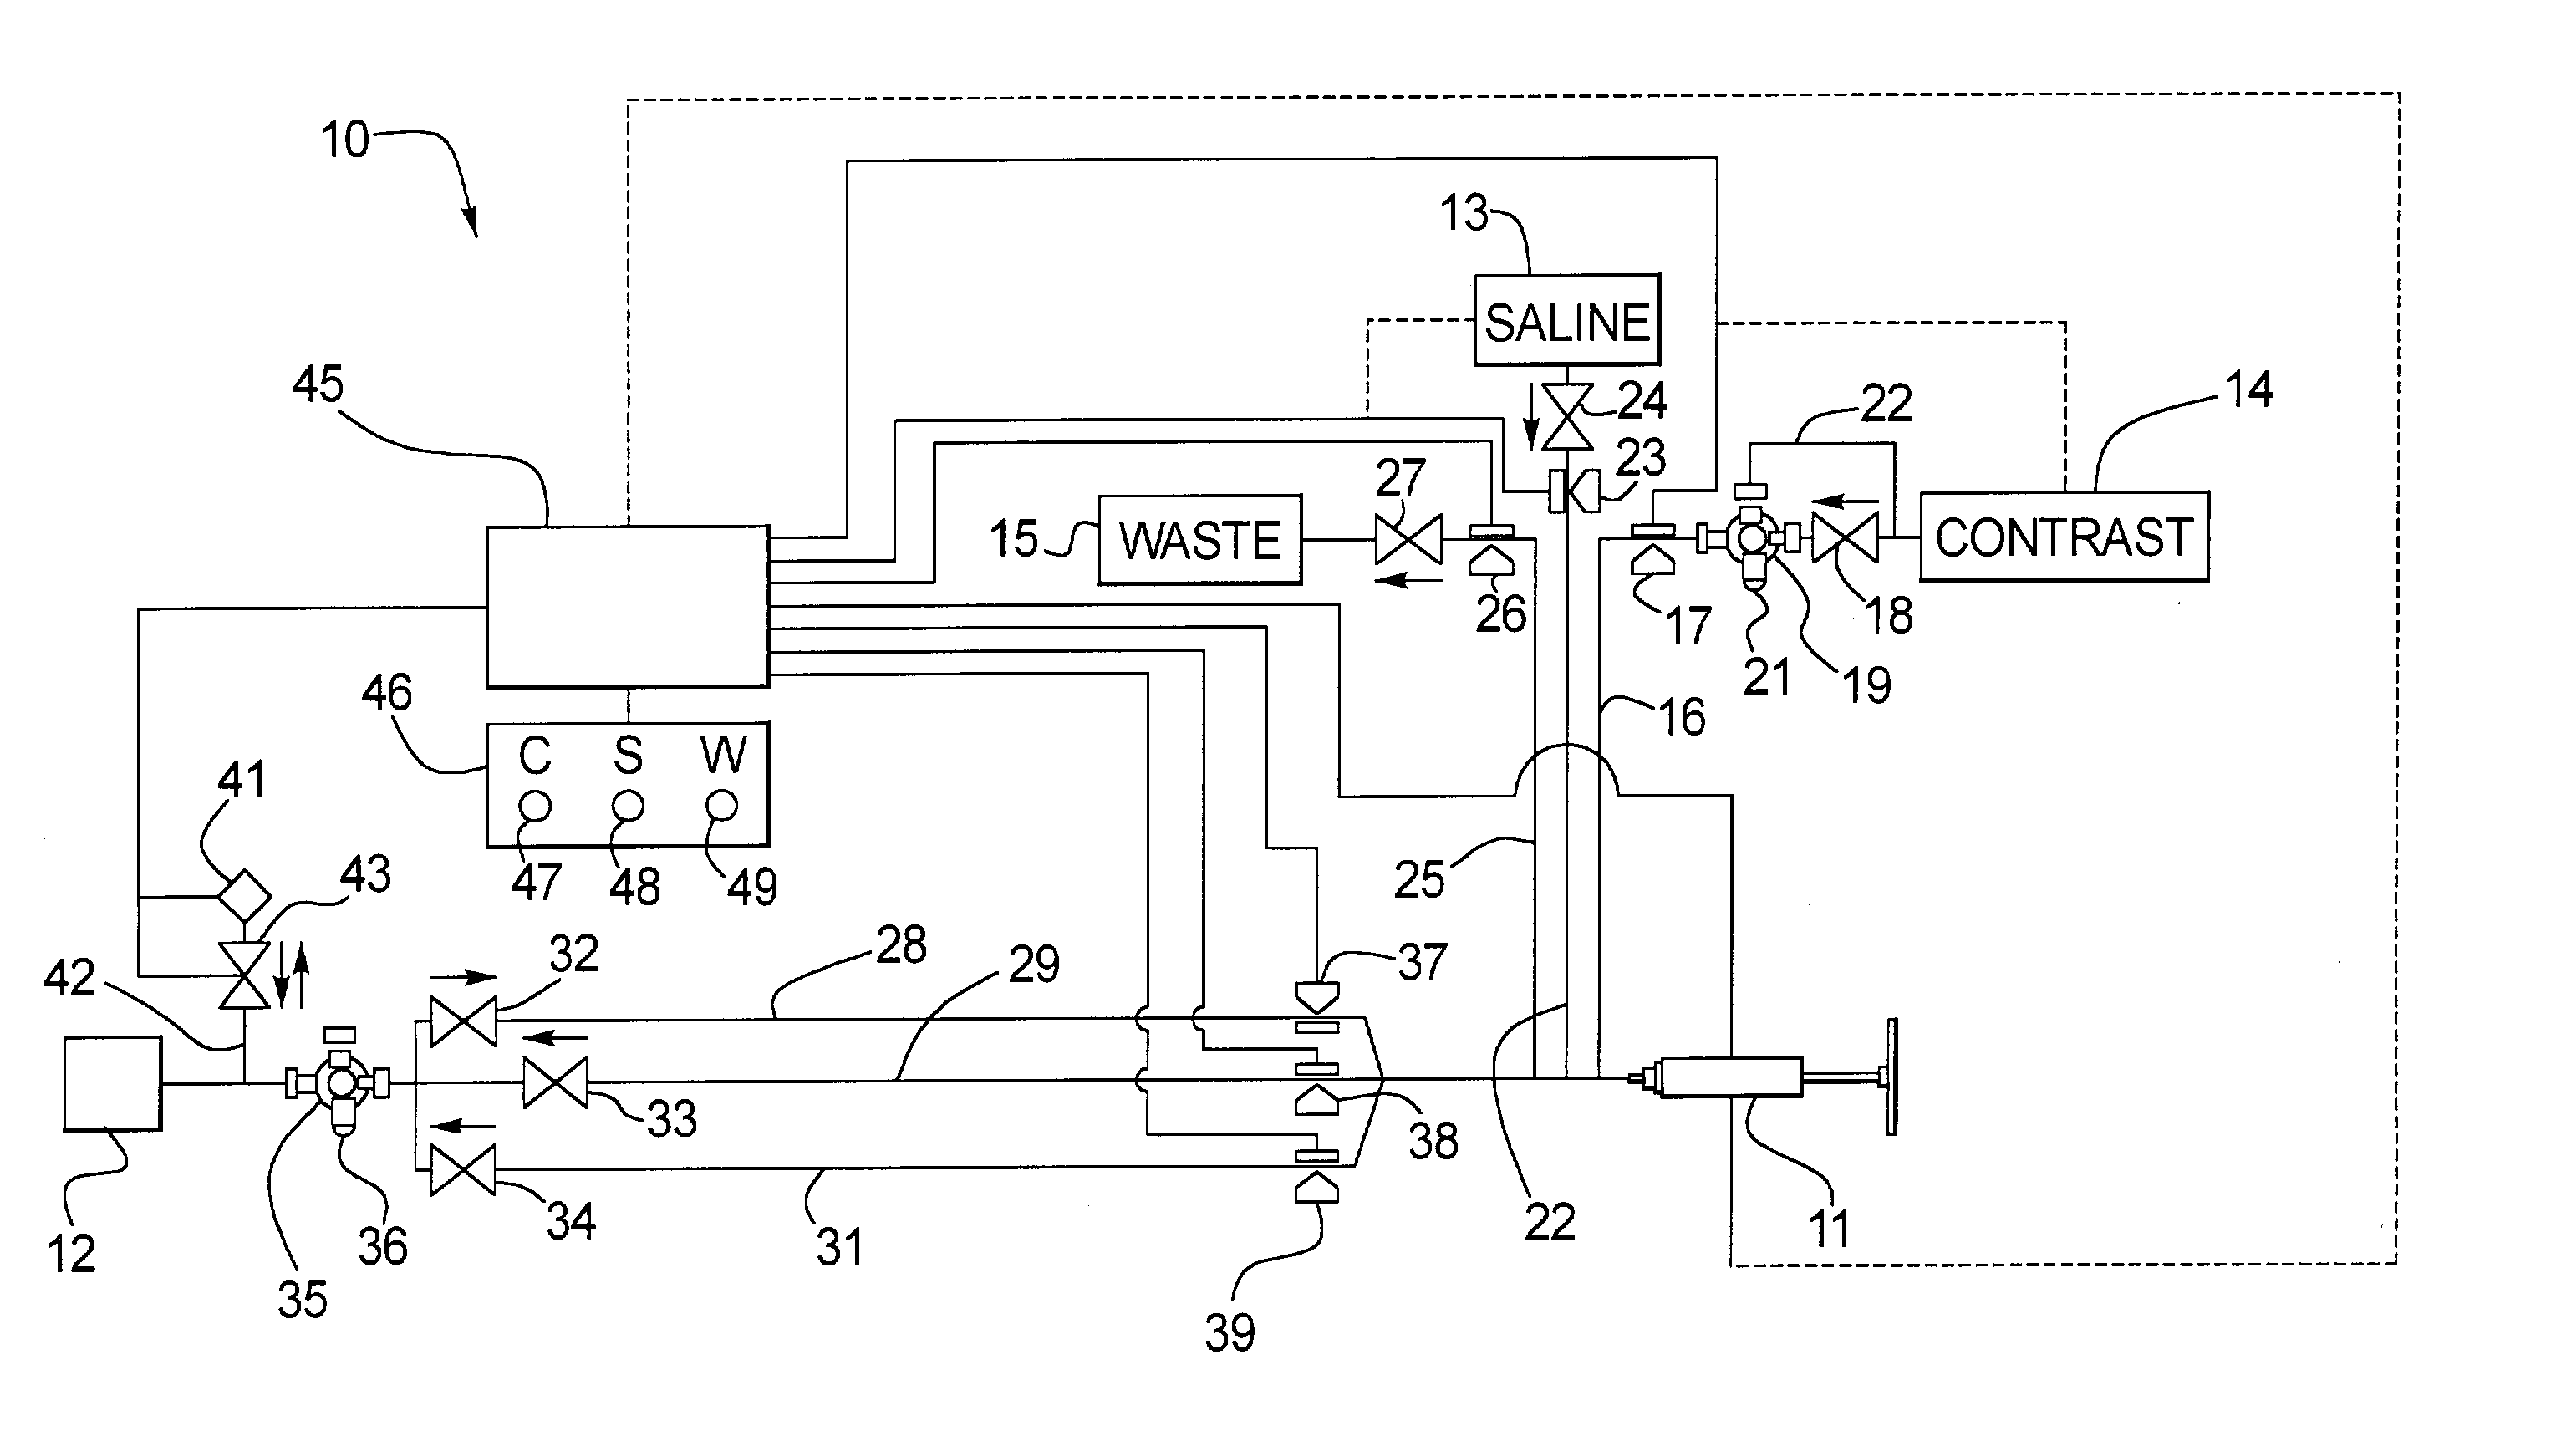 Angiographic fluid control system